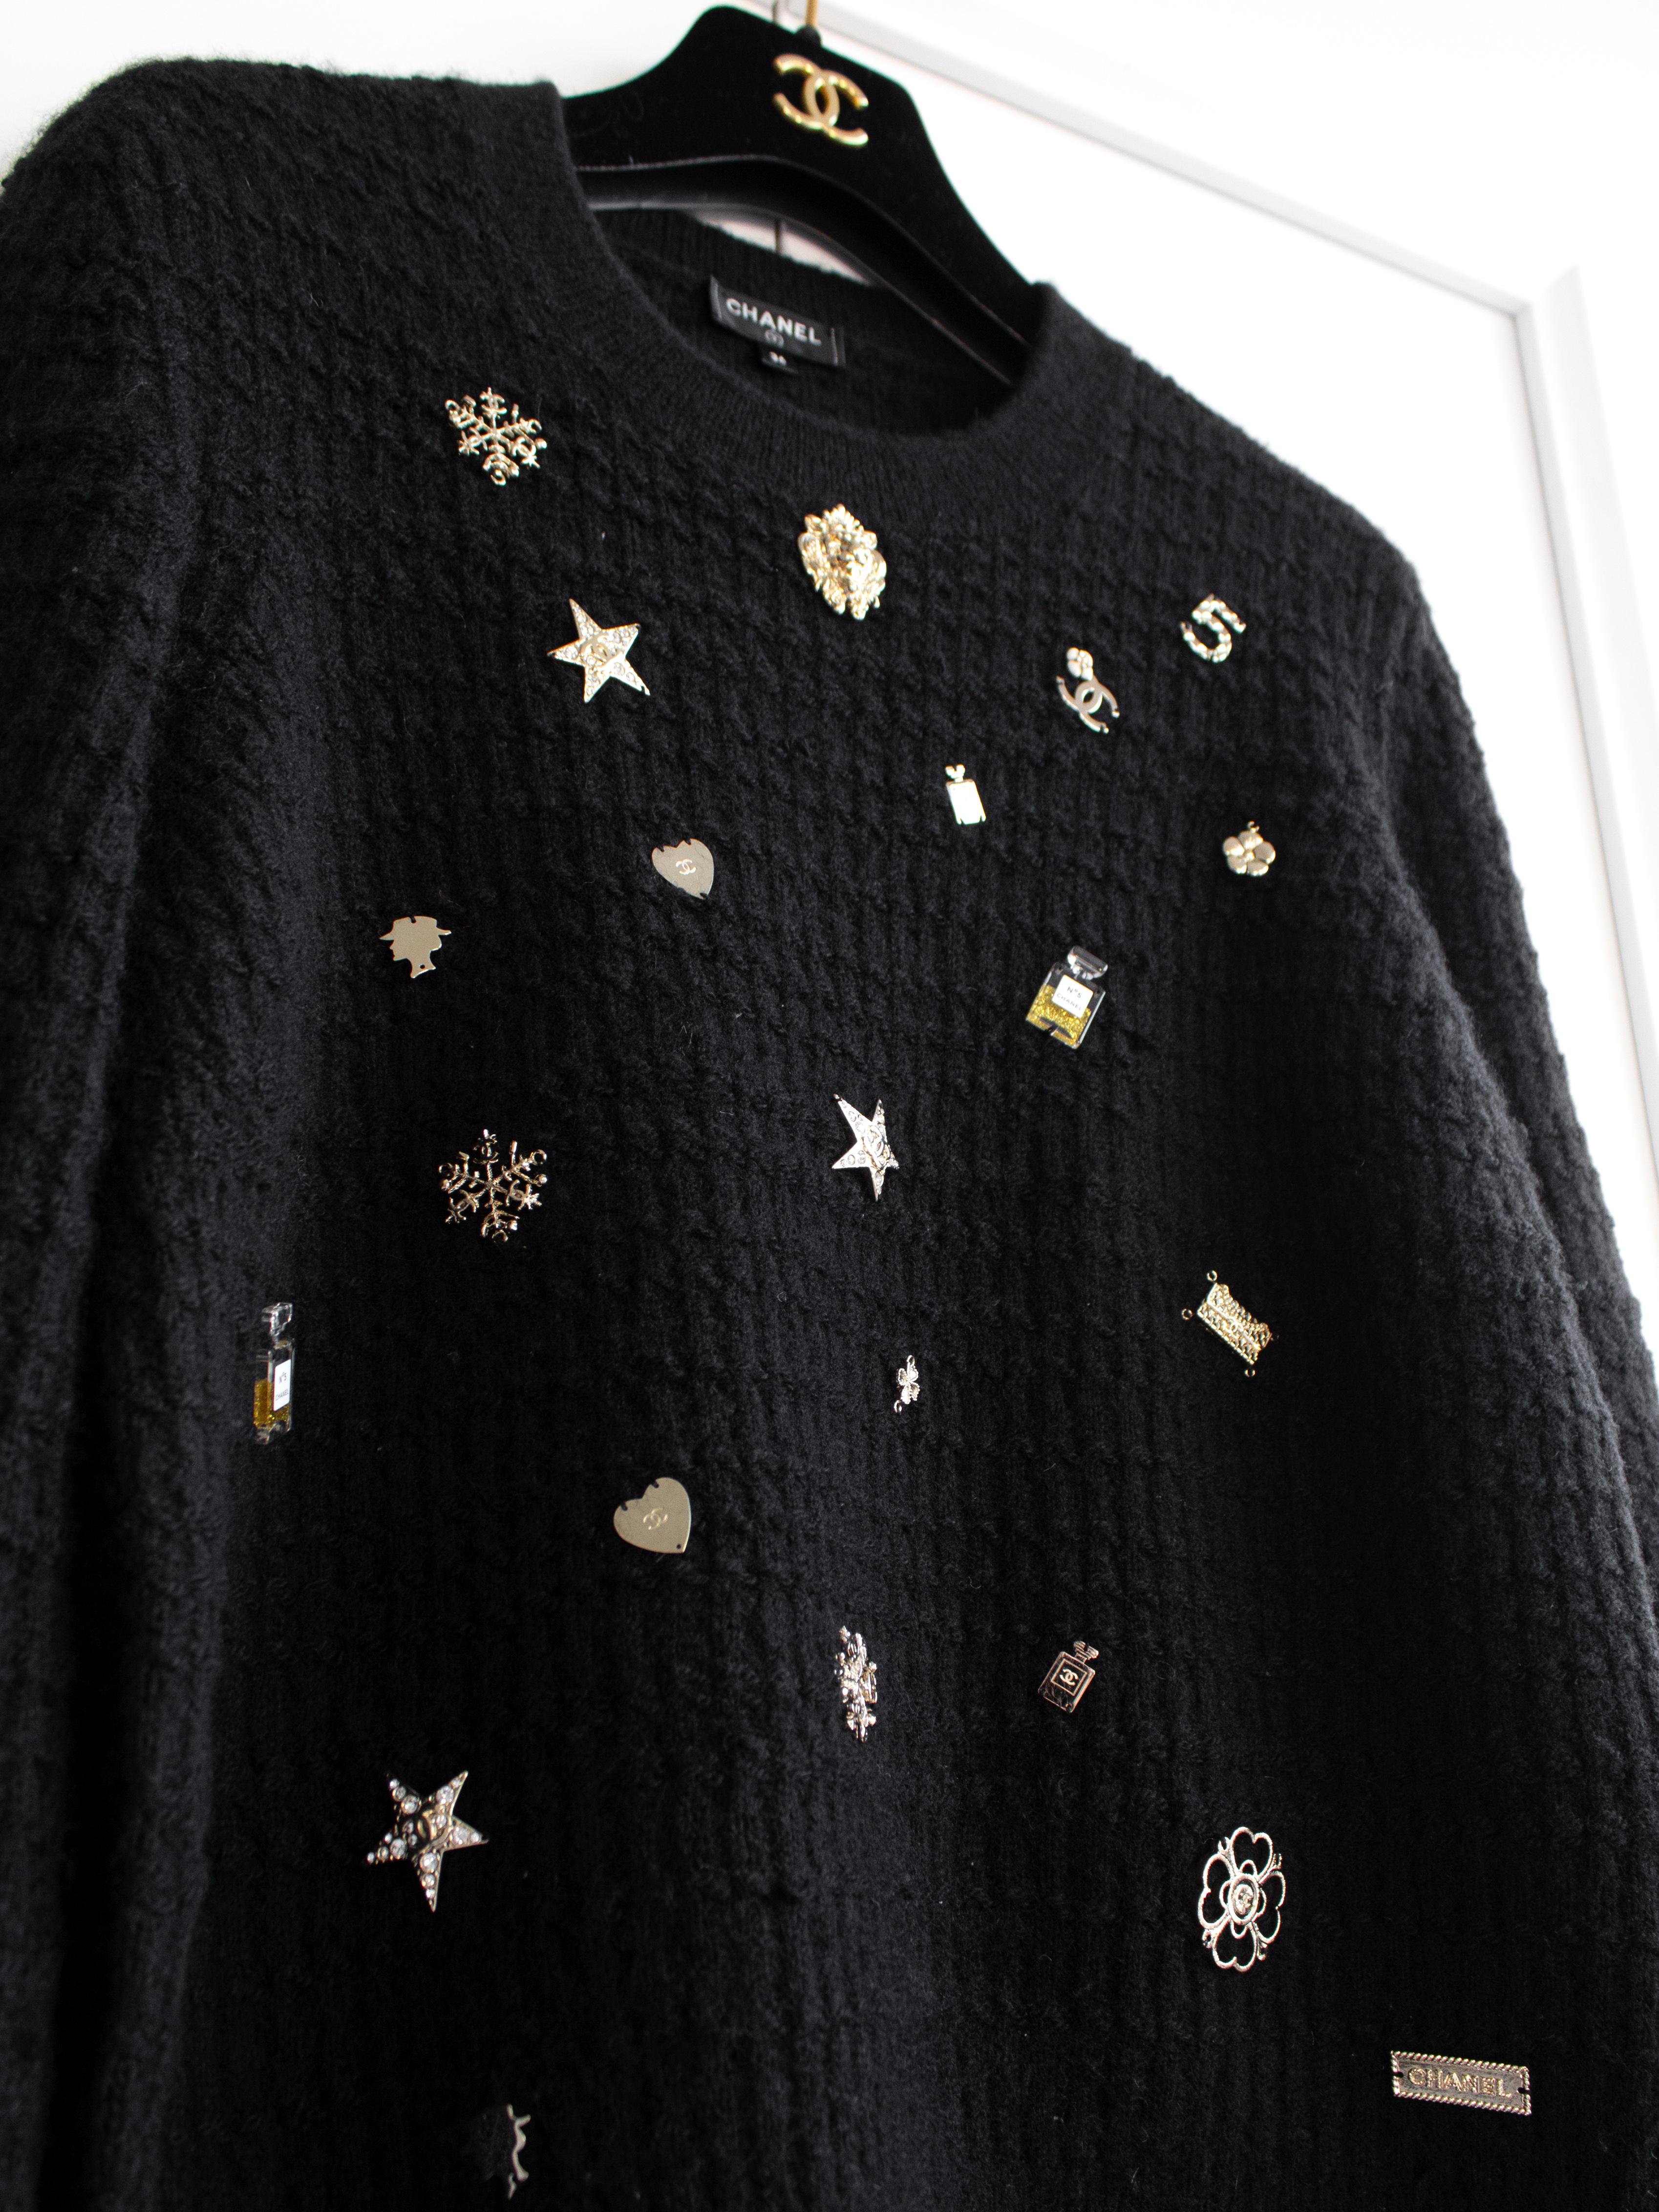 Chanel Coco Neige 2018 Lucky Charms Black Gold Embellished 18B Cashmere Sweater 4